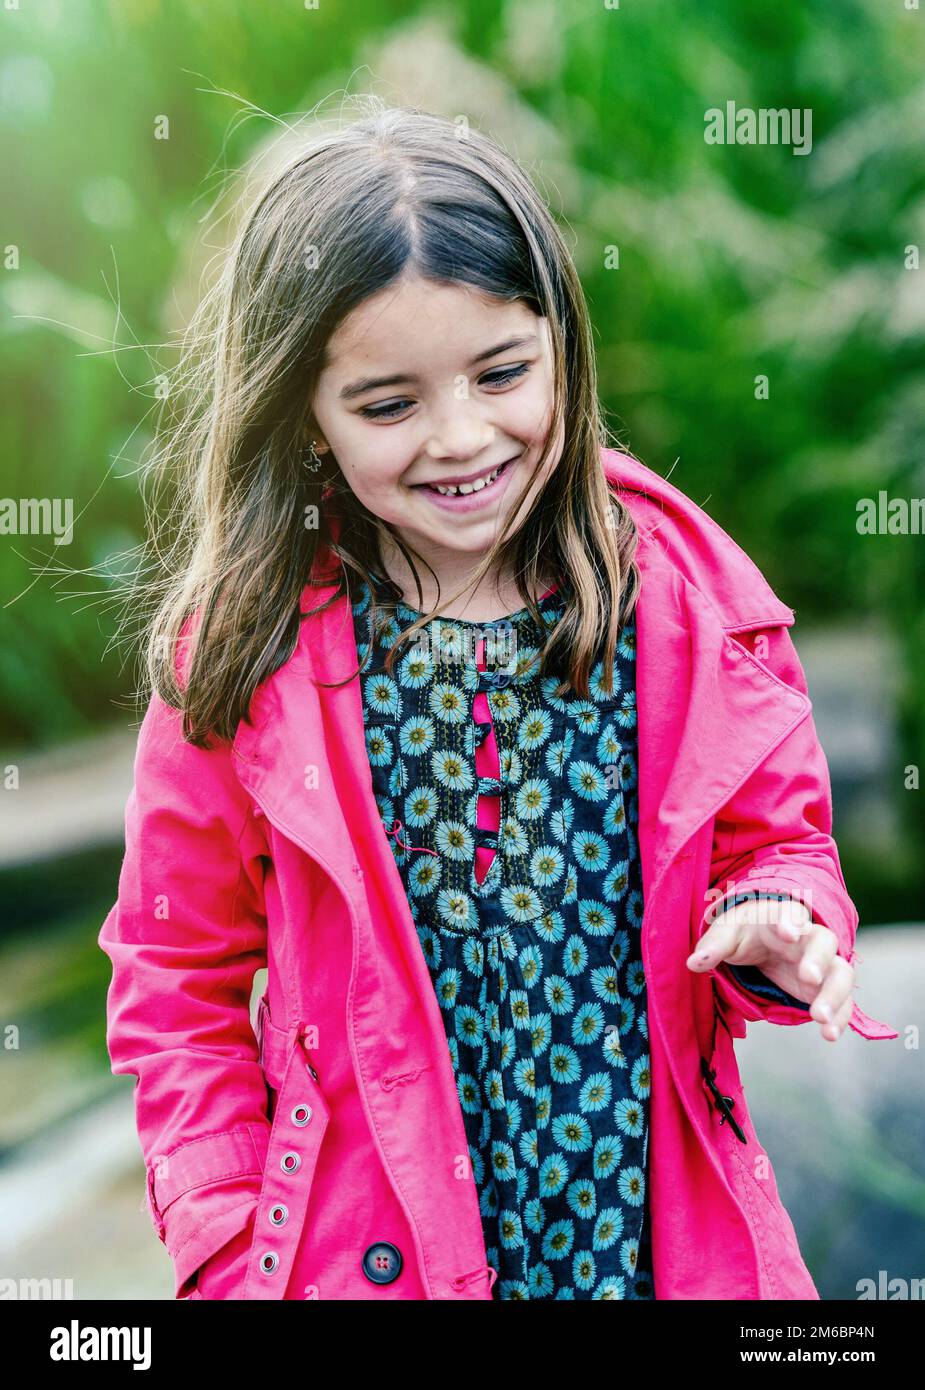 Cute child with greenery in the background Stock Photo